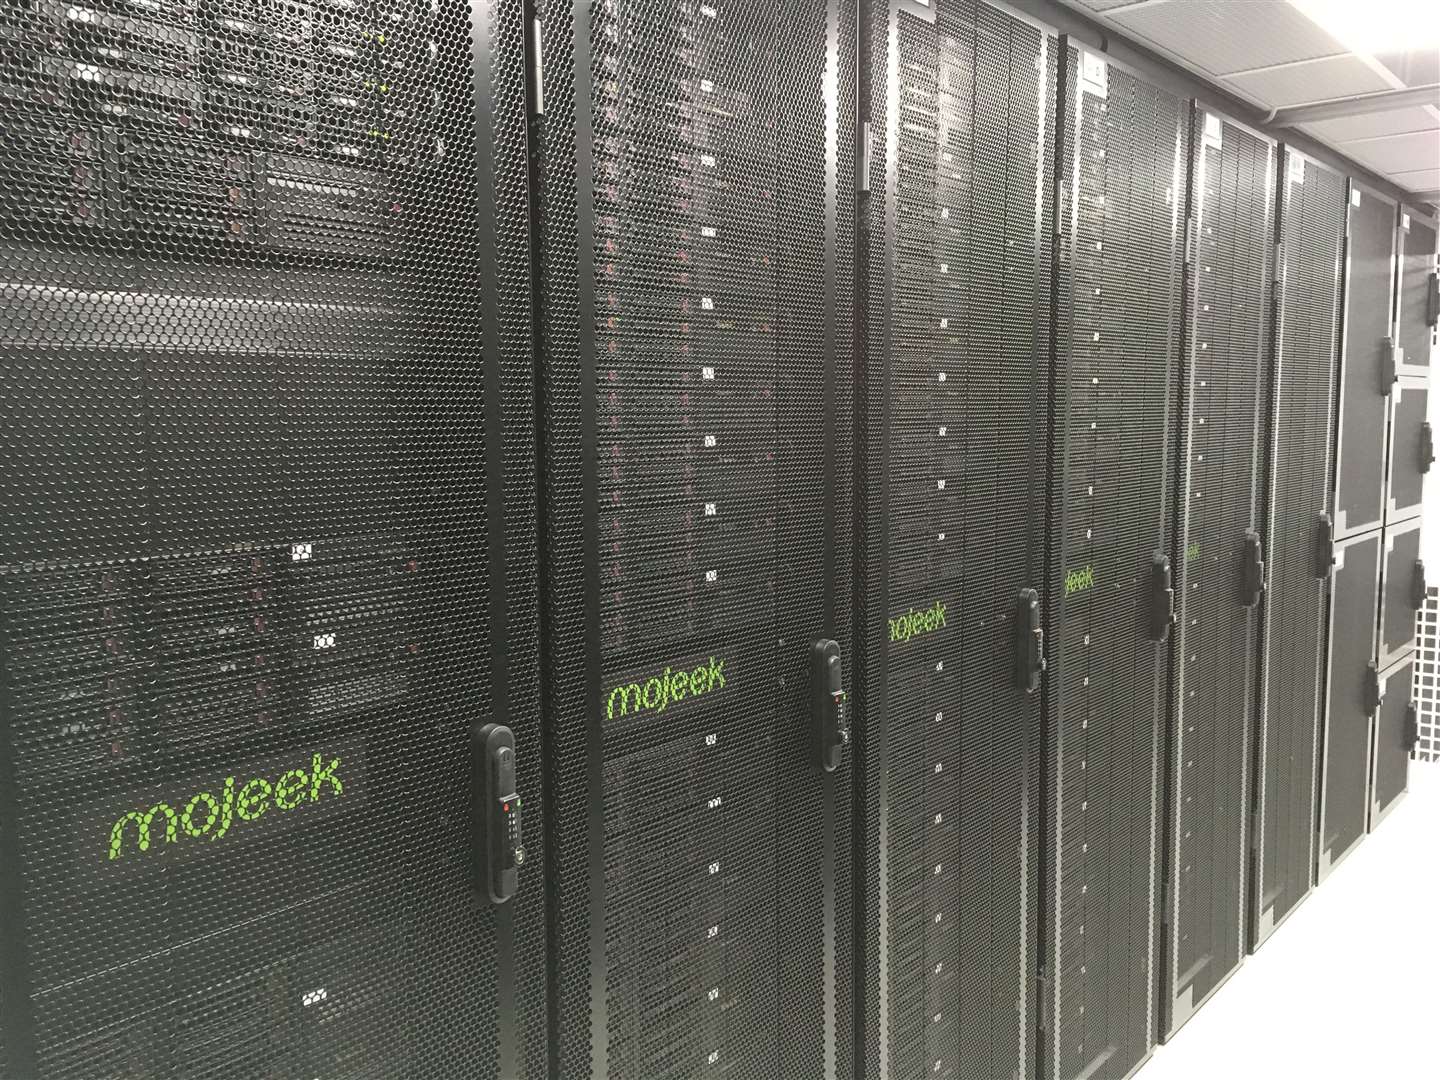 Just some of Mojeek's bank of servers at Custodian in Maidstone